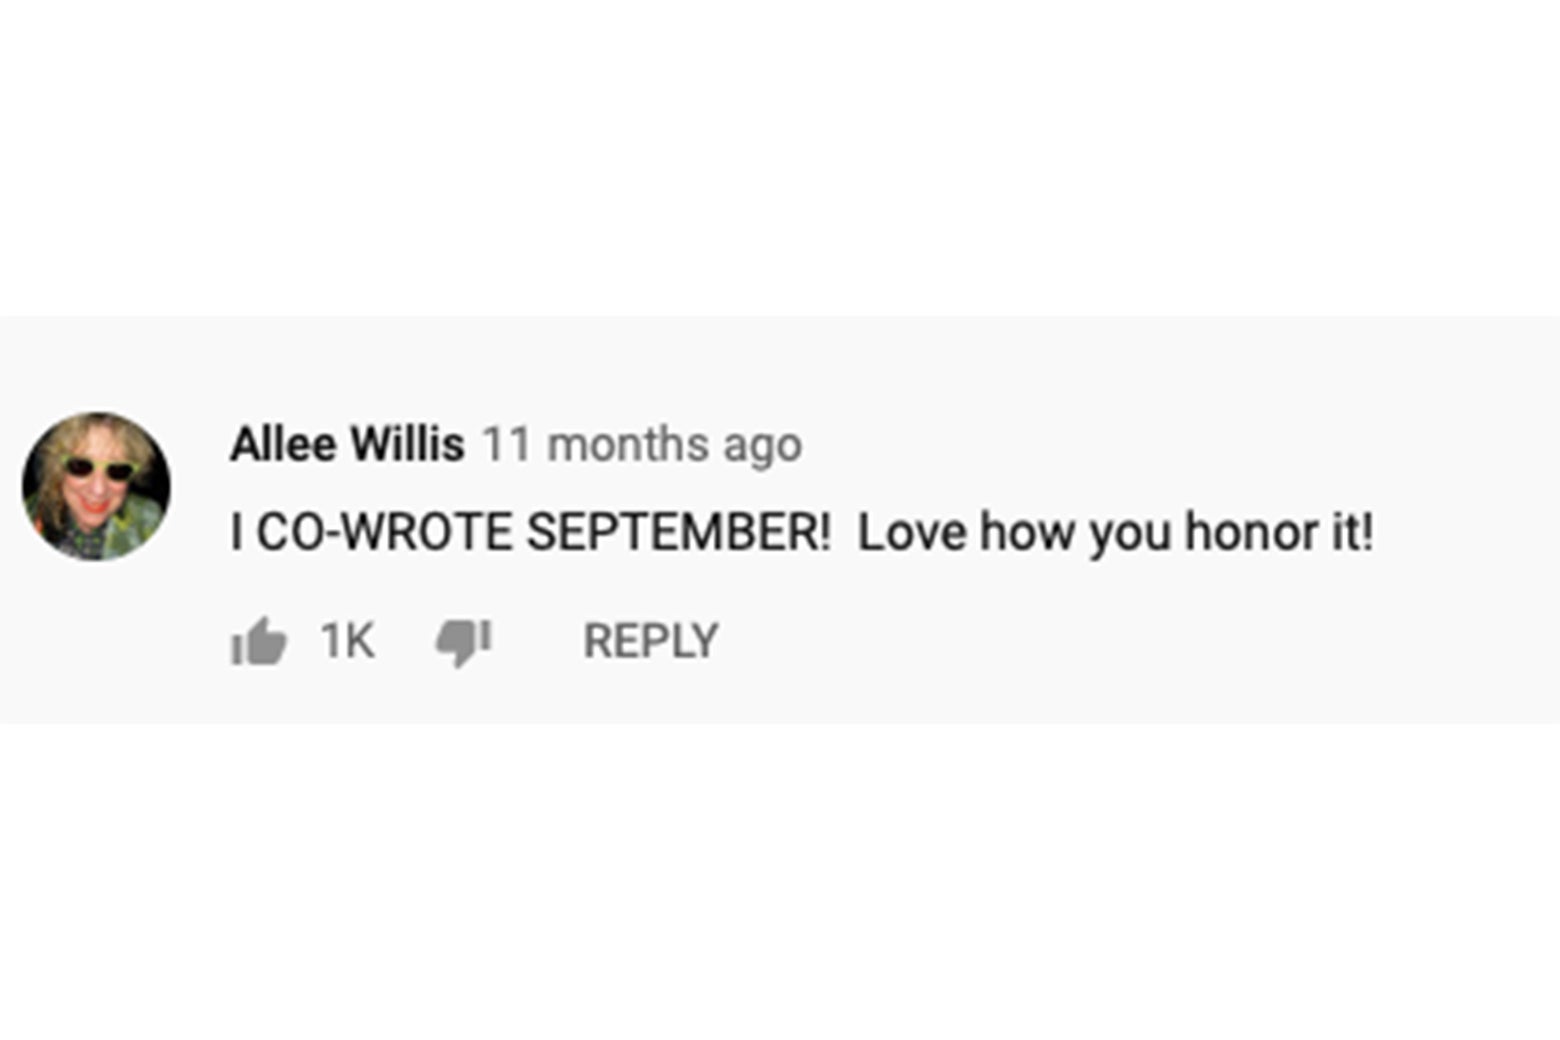 A YouTube comment from Allee Willis that reads, "I CO-WROTE SEPTEMBER! Love how you honor it!"